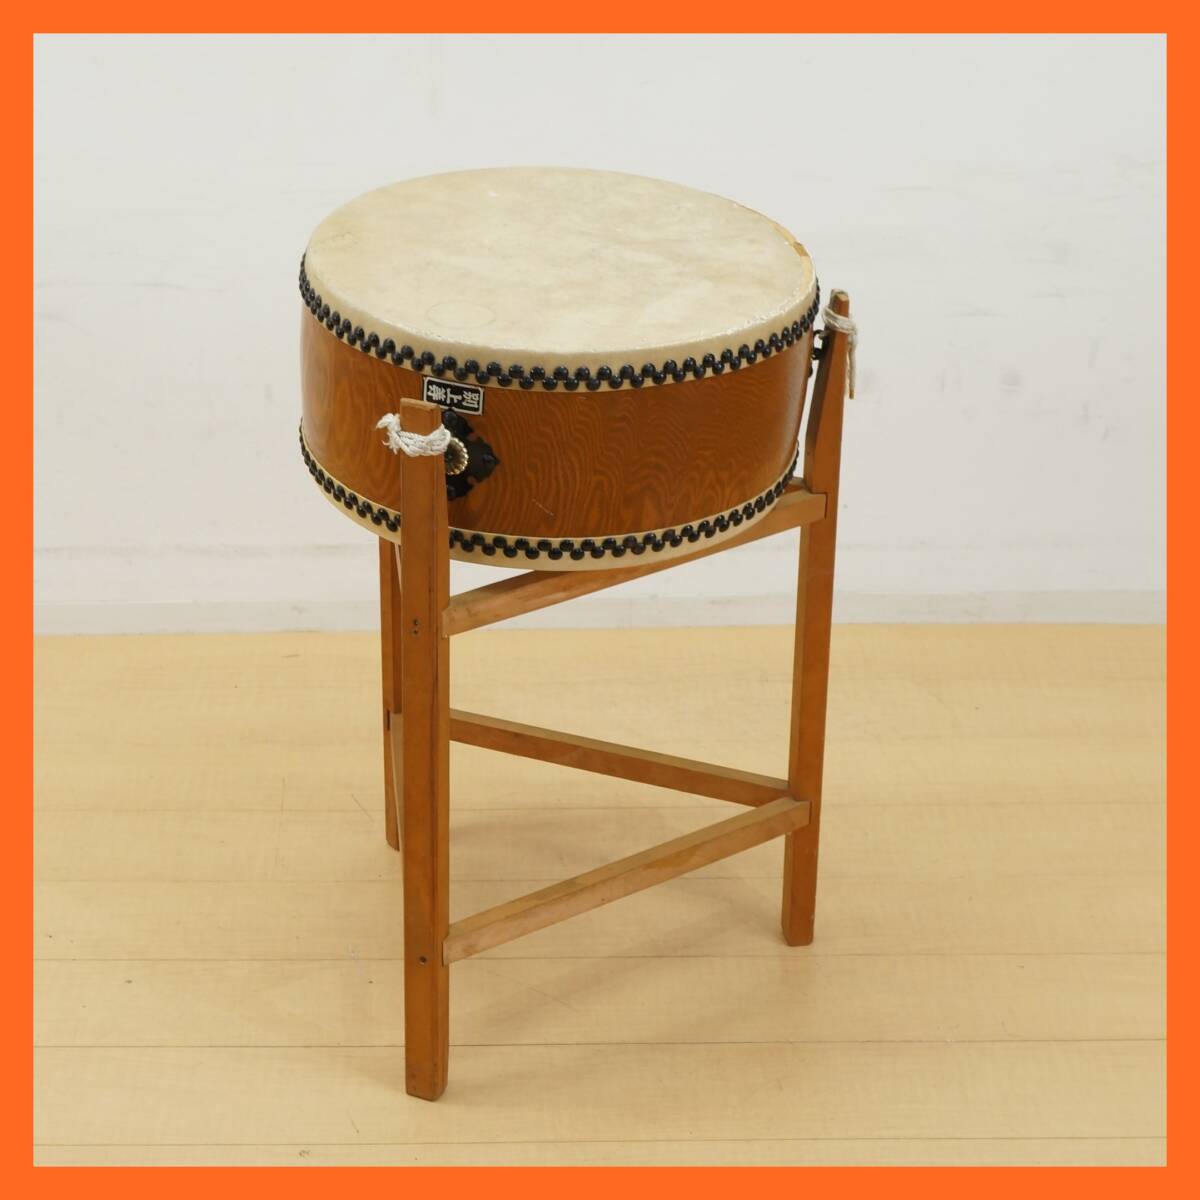  higashi is :[ Japanese drum ] flat trunk futoshi hand drum another on etc. wood grain material made flat futoshi hand drum pcs attaching total height approximately 77.4.3ps.@ footrest traditional Japanese musical instrument * free shipping *